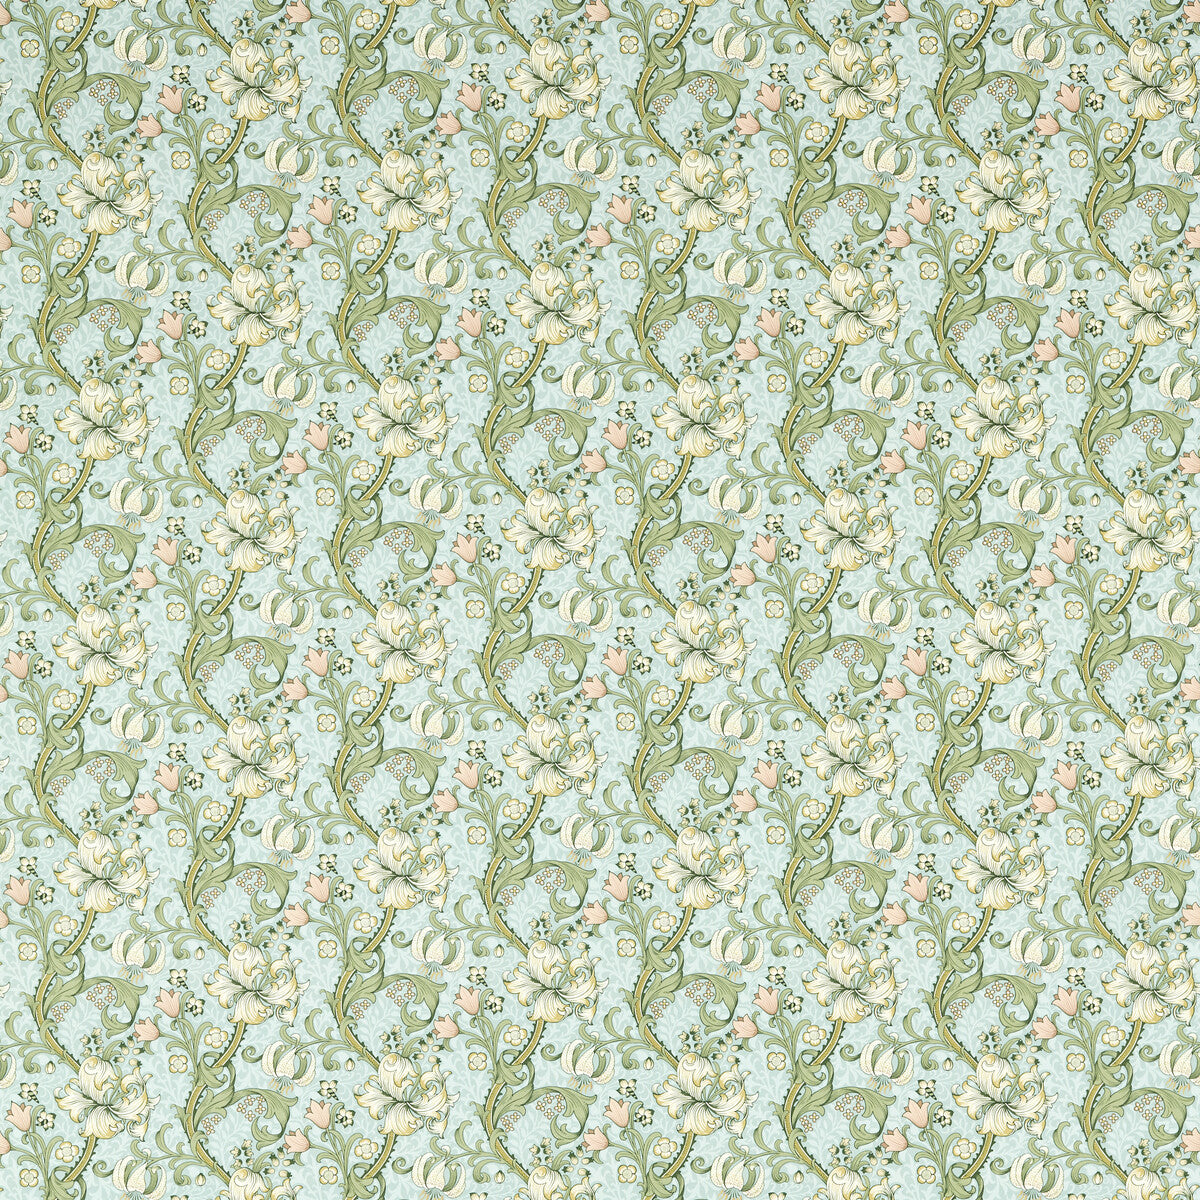 Golden Lily fabric in apple/blush color - pattern F1677/05.CAC.0 - by Clarke And Clarke in the Clarke &amp; Clarke William Morris Designs collection